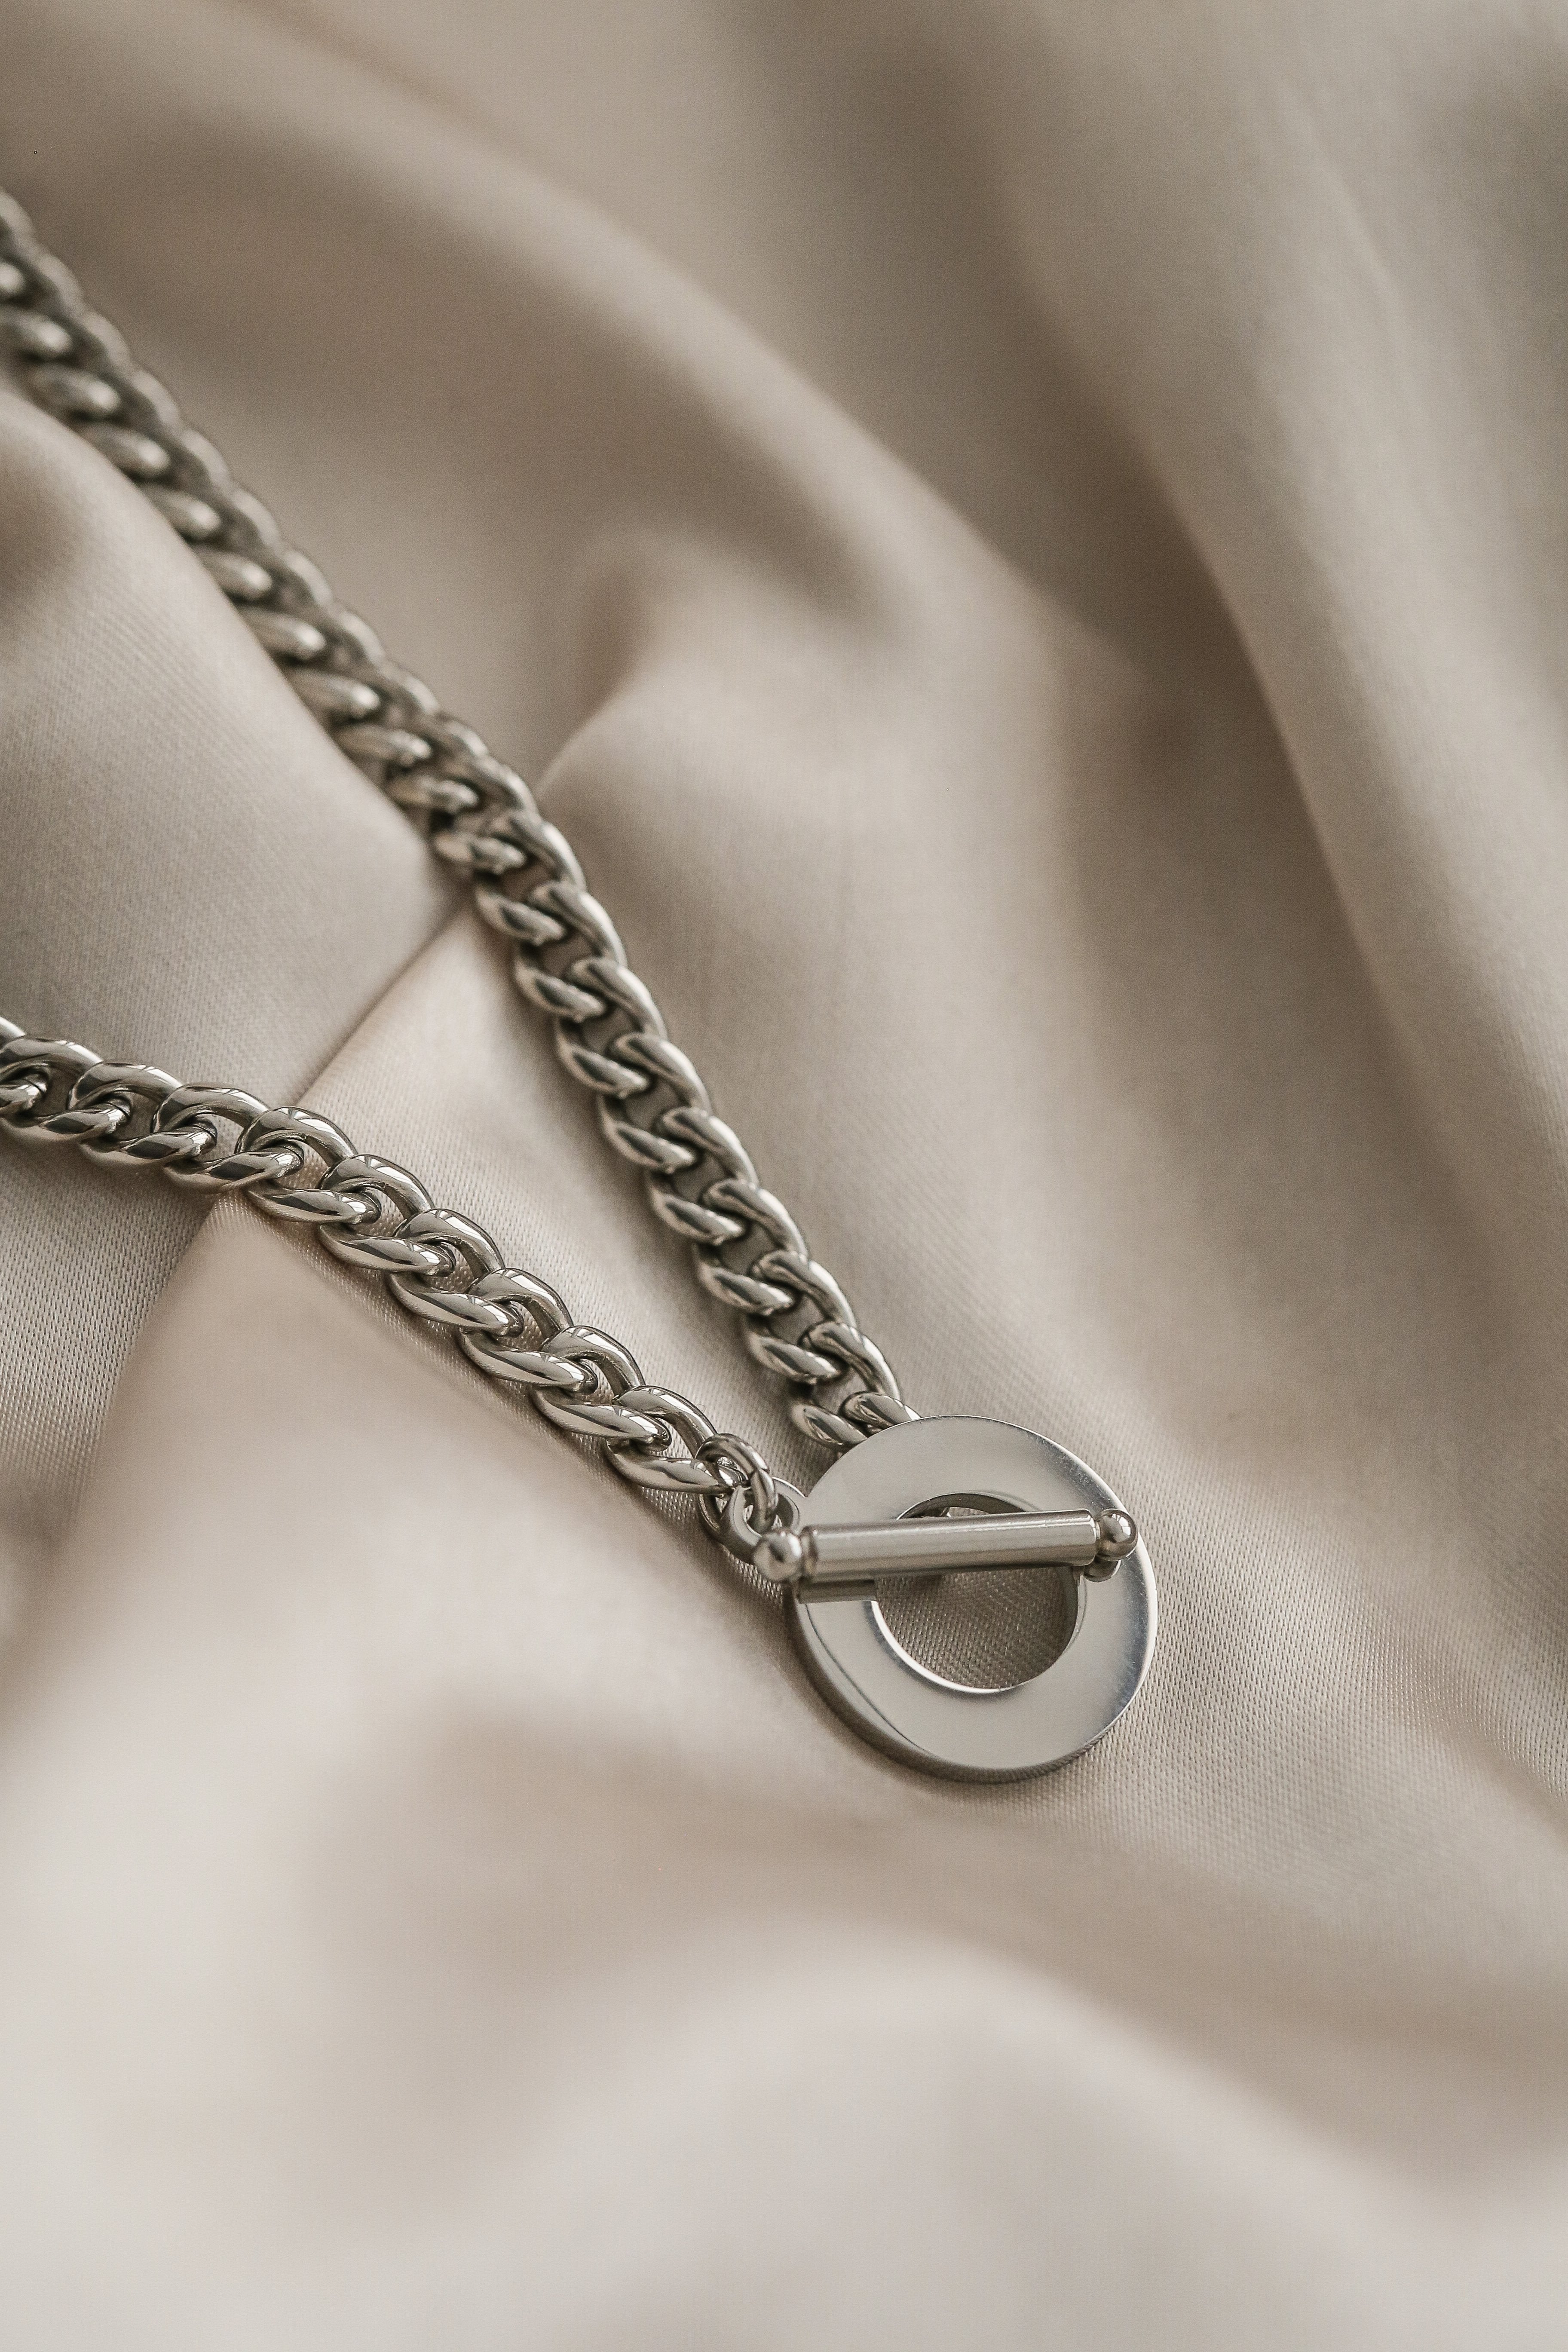 Clara Necklace - Boutique Minimaliste has waterproof, durable, elegant and vintage inspired jewelry